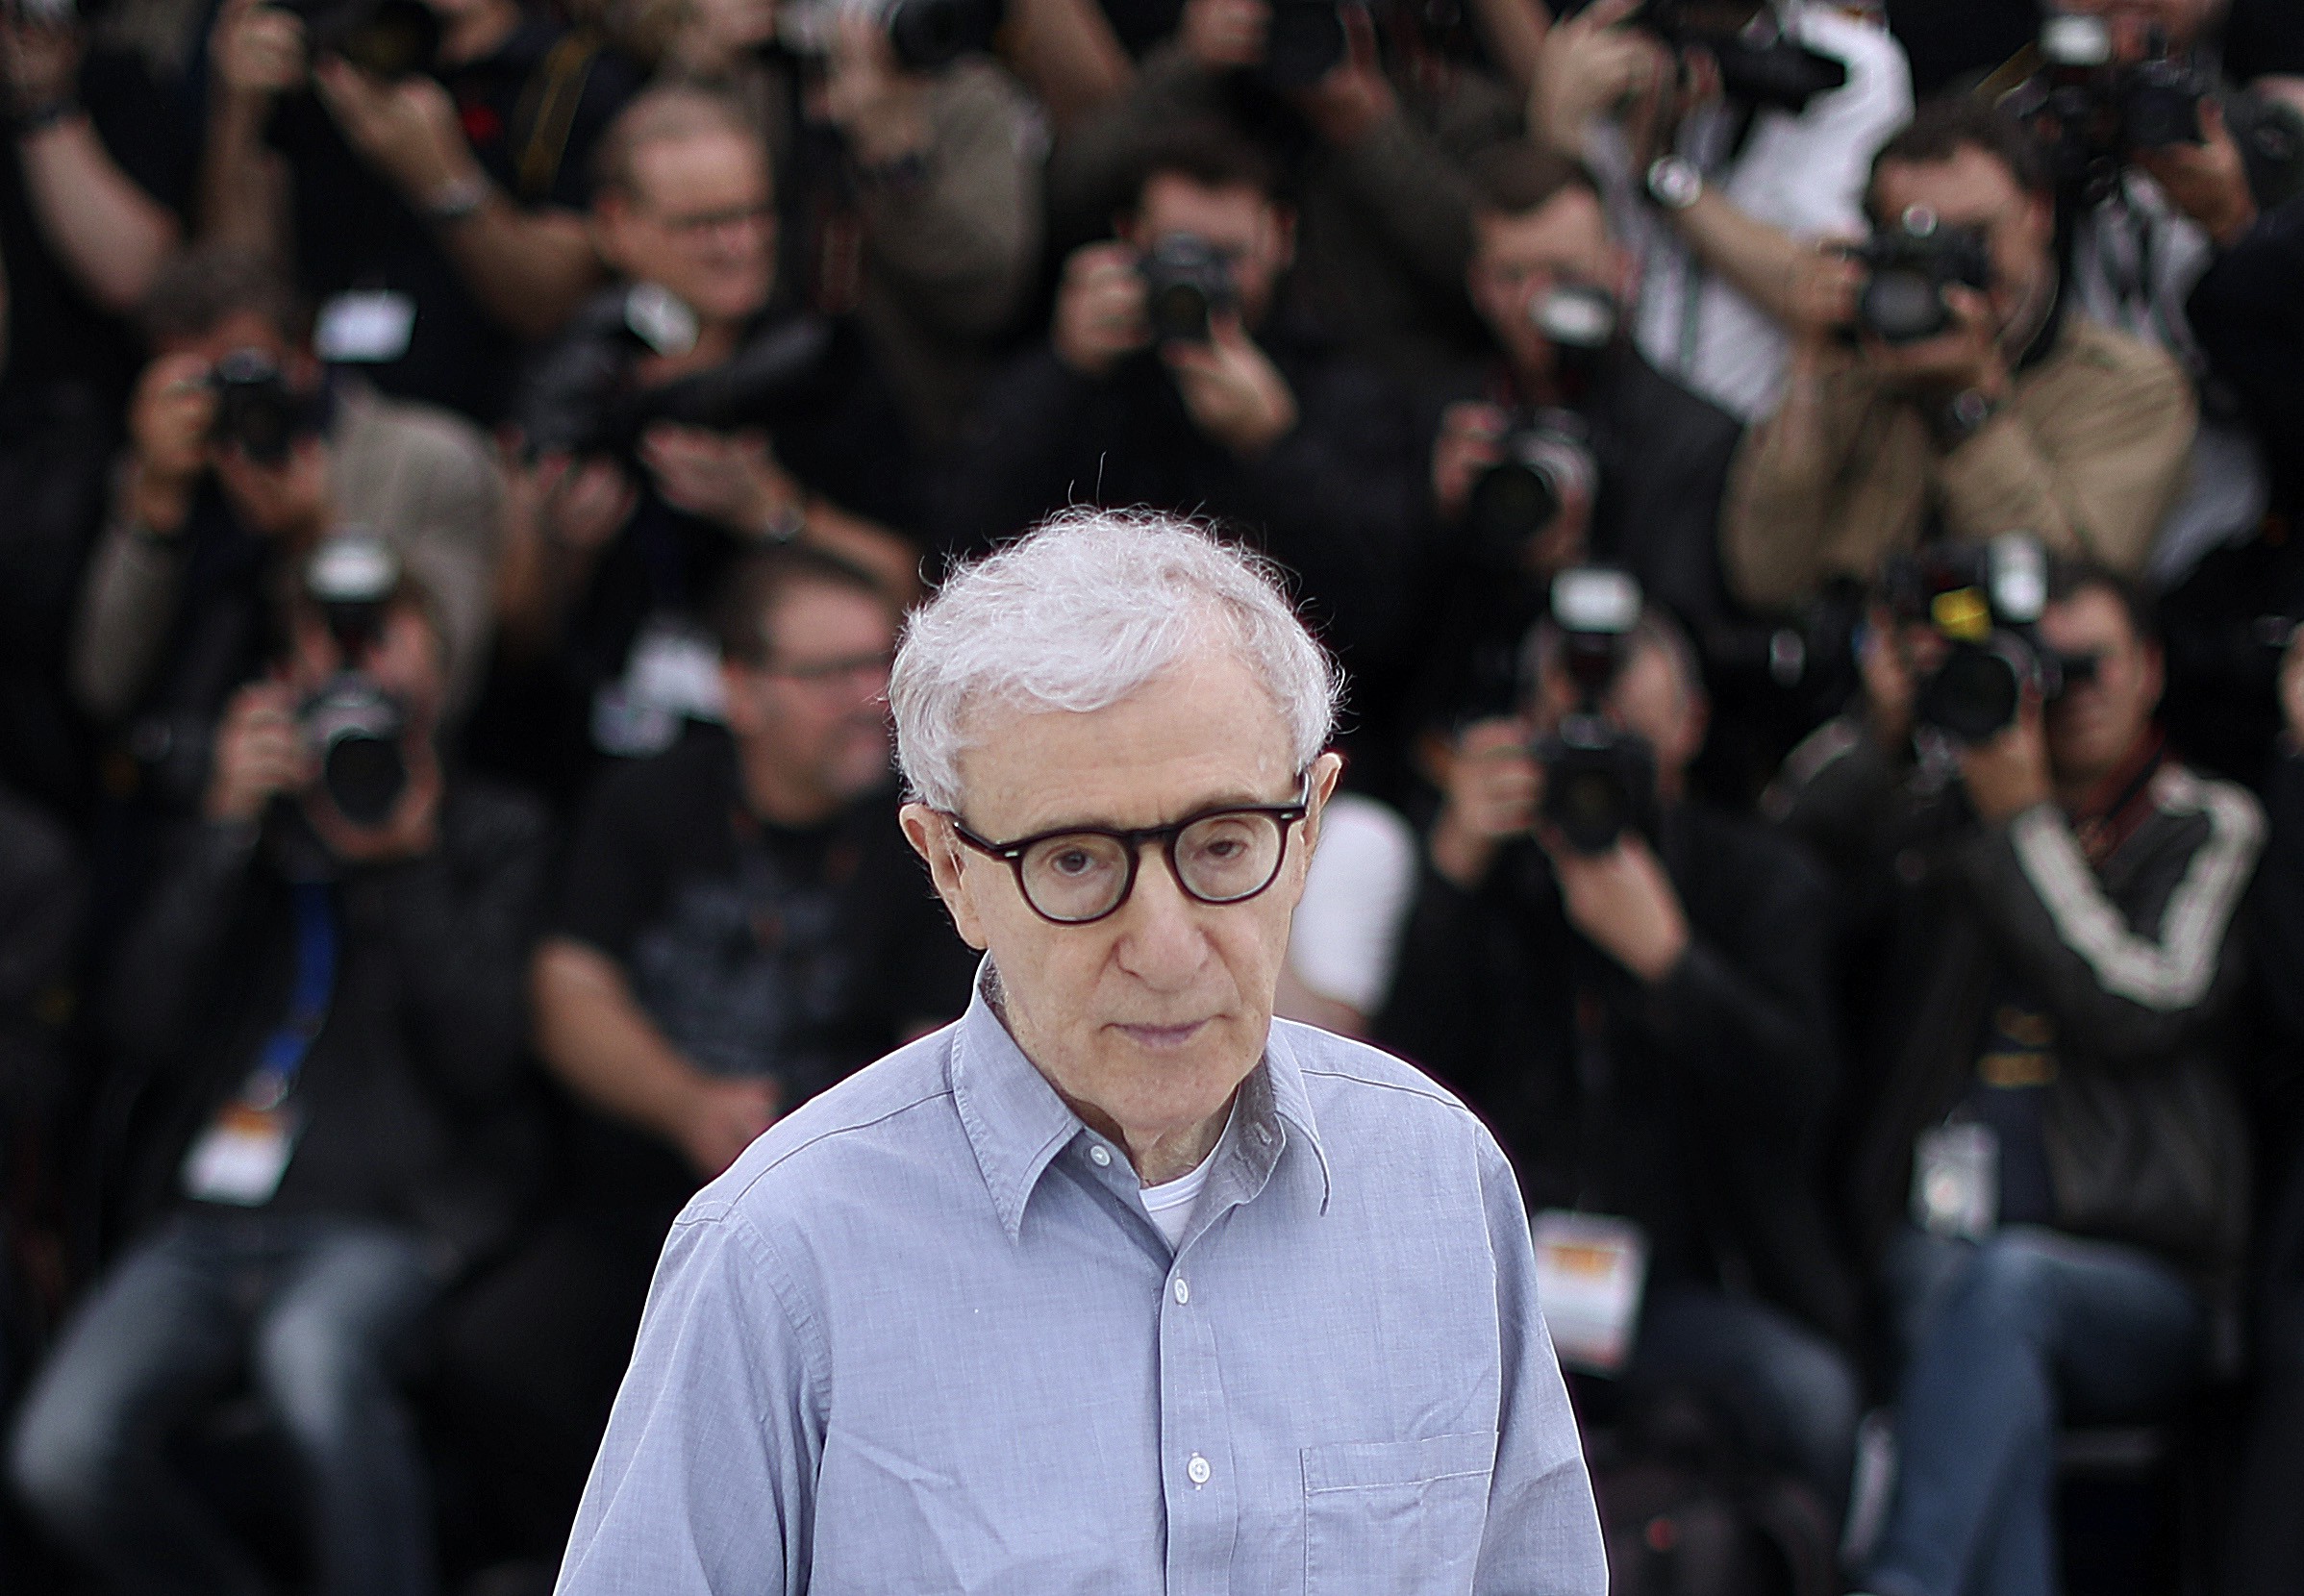 Without naming Woody Allen, from whom fellow stars have distanced themselves amid a sexual assault allegation, actress admits she cannot keep to herself regrets she has ‘about poor decisions to work with individuals’